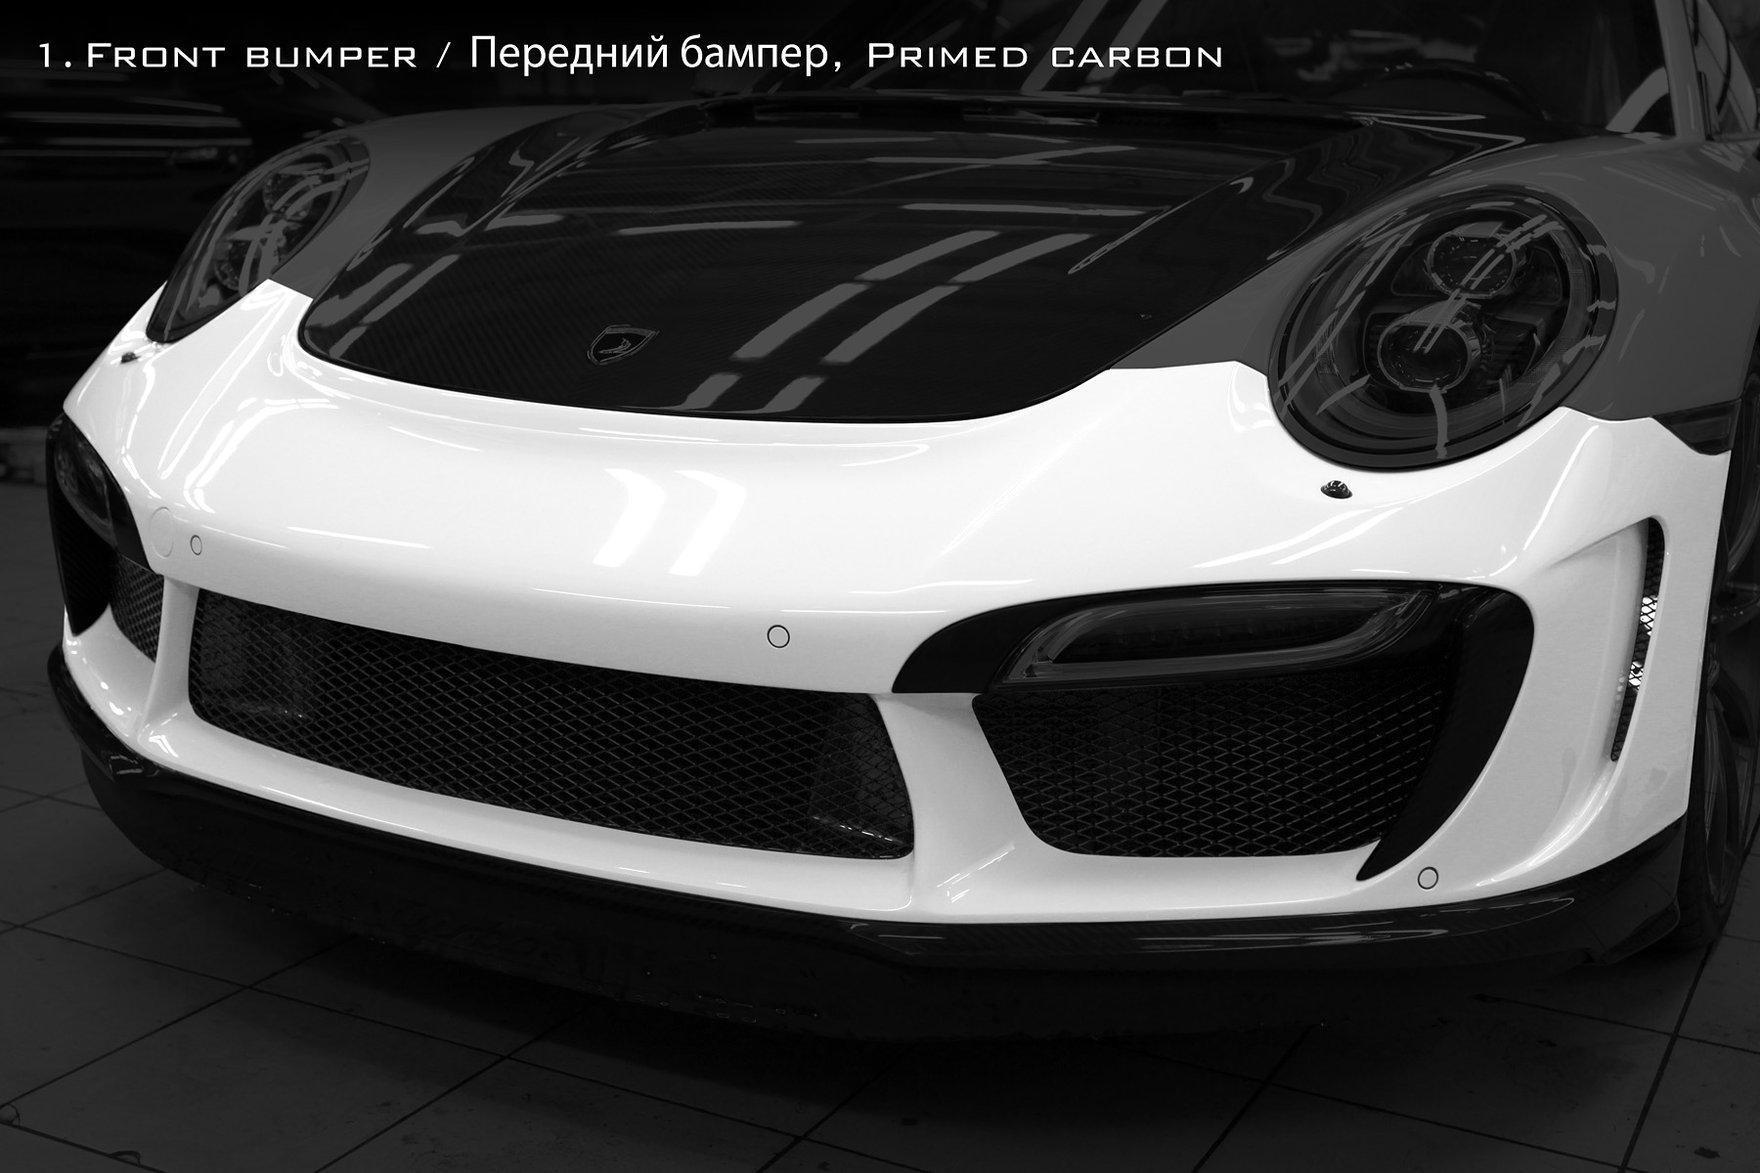 Check our price and buy Topcar Design body kit for Porsche 991 991 Stinger